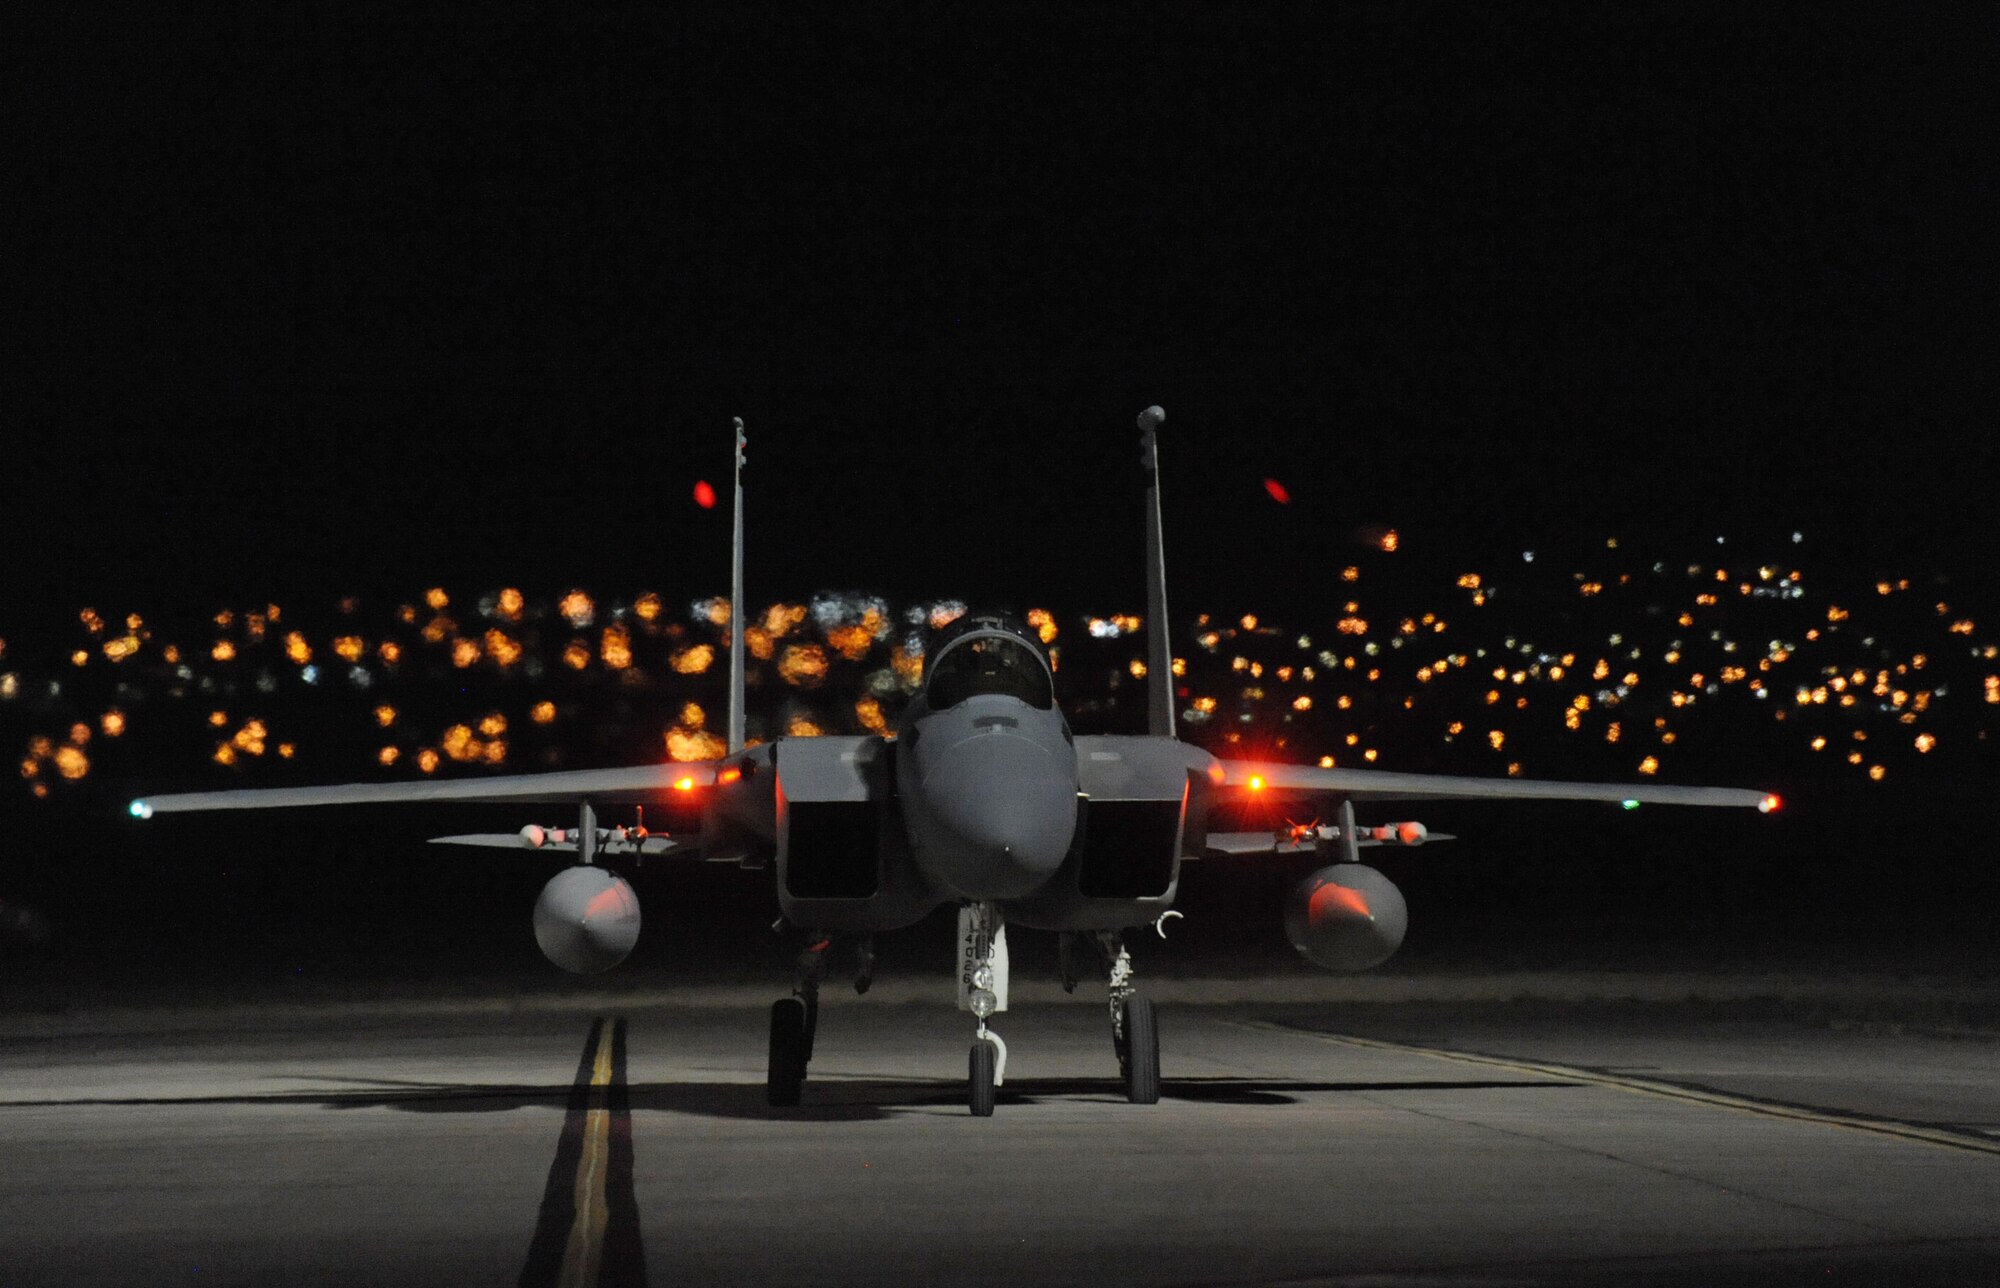 An Oregon Air National Guard F-15 Eagle, assigned to the 142nd Fighter Wing, returns to Nellis Air Force, Nev., after a late day sortie in support of the Weapons Instructor Course, June 8, 2017. Over 120 Oregon Air Guardsmen are supporting the Weapons Instructor Course during their three-week duty assignment. (U.S. Air National Guard photo by Master Sgt. John Hughel, 142nd Fighter Wing Public Affairs)